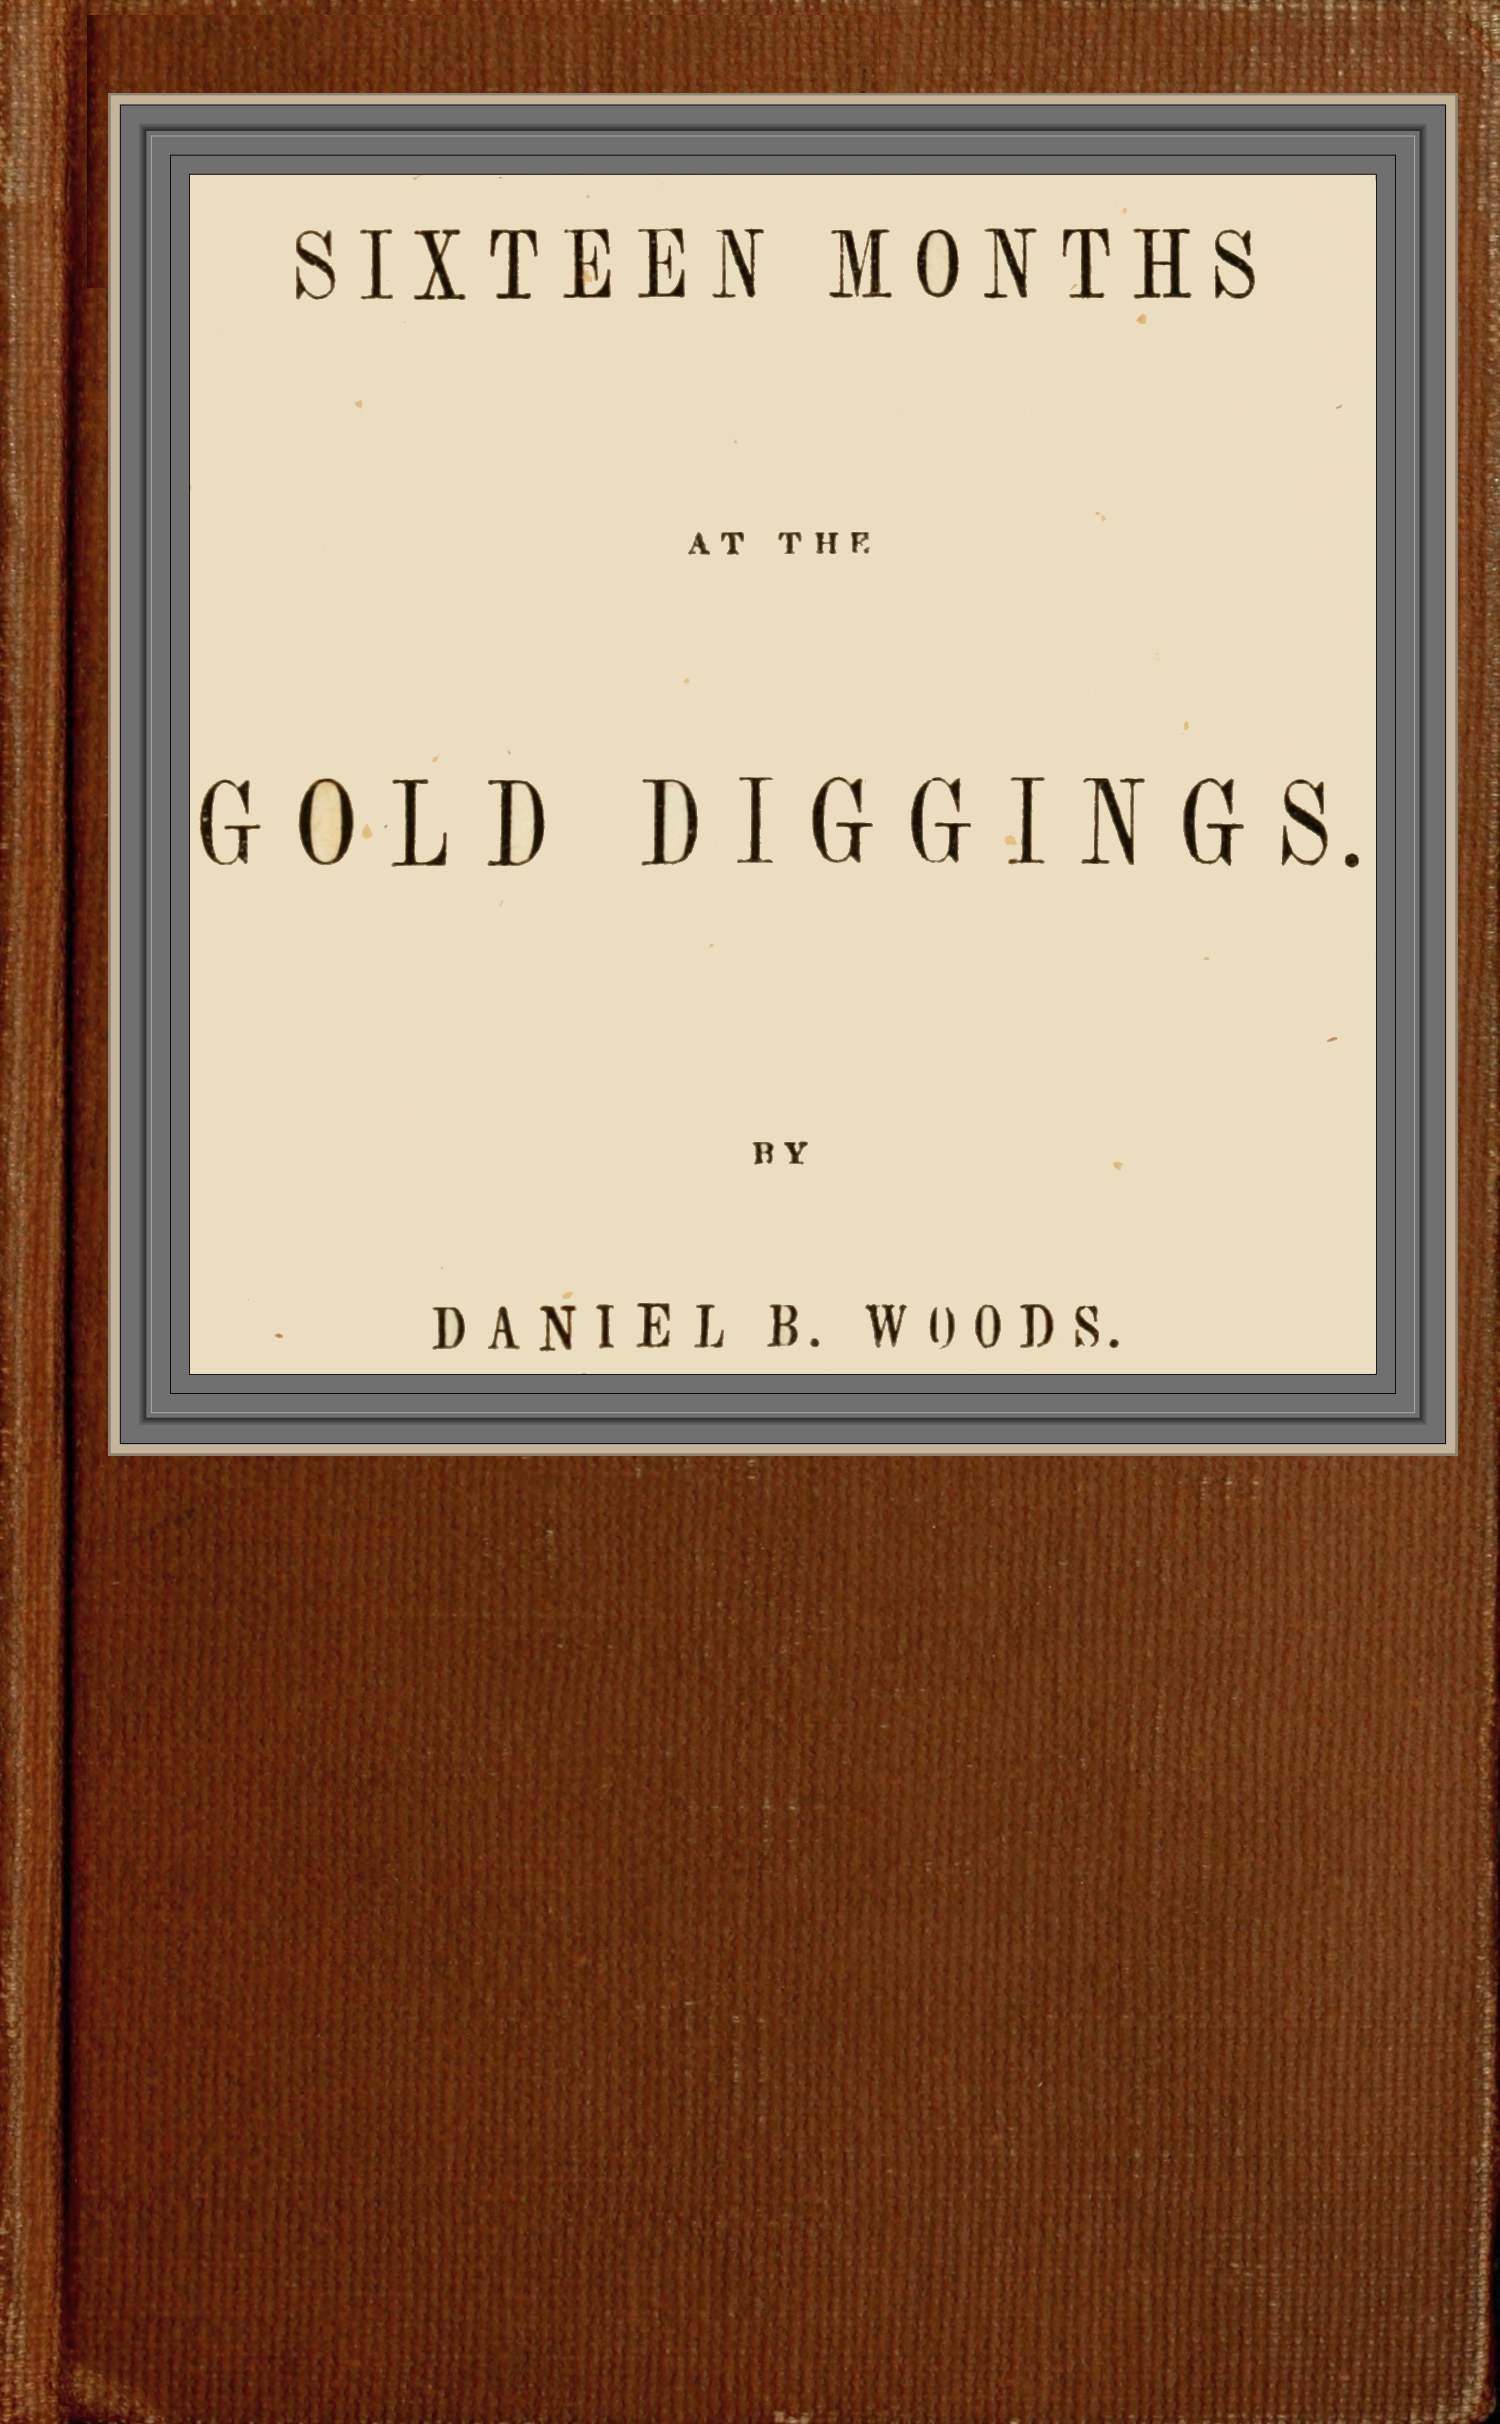 The Project Gutenberg Daniel of gold B. Sixteen by the at eBook months diggings